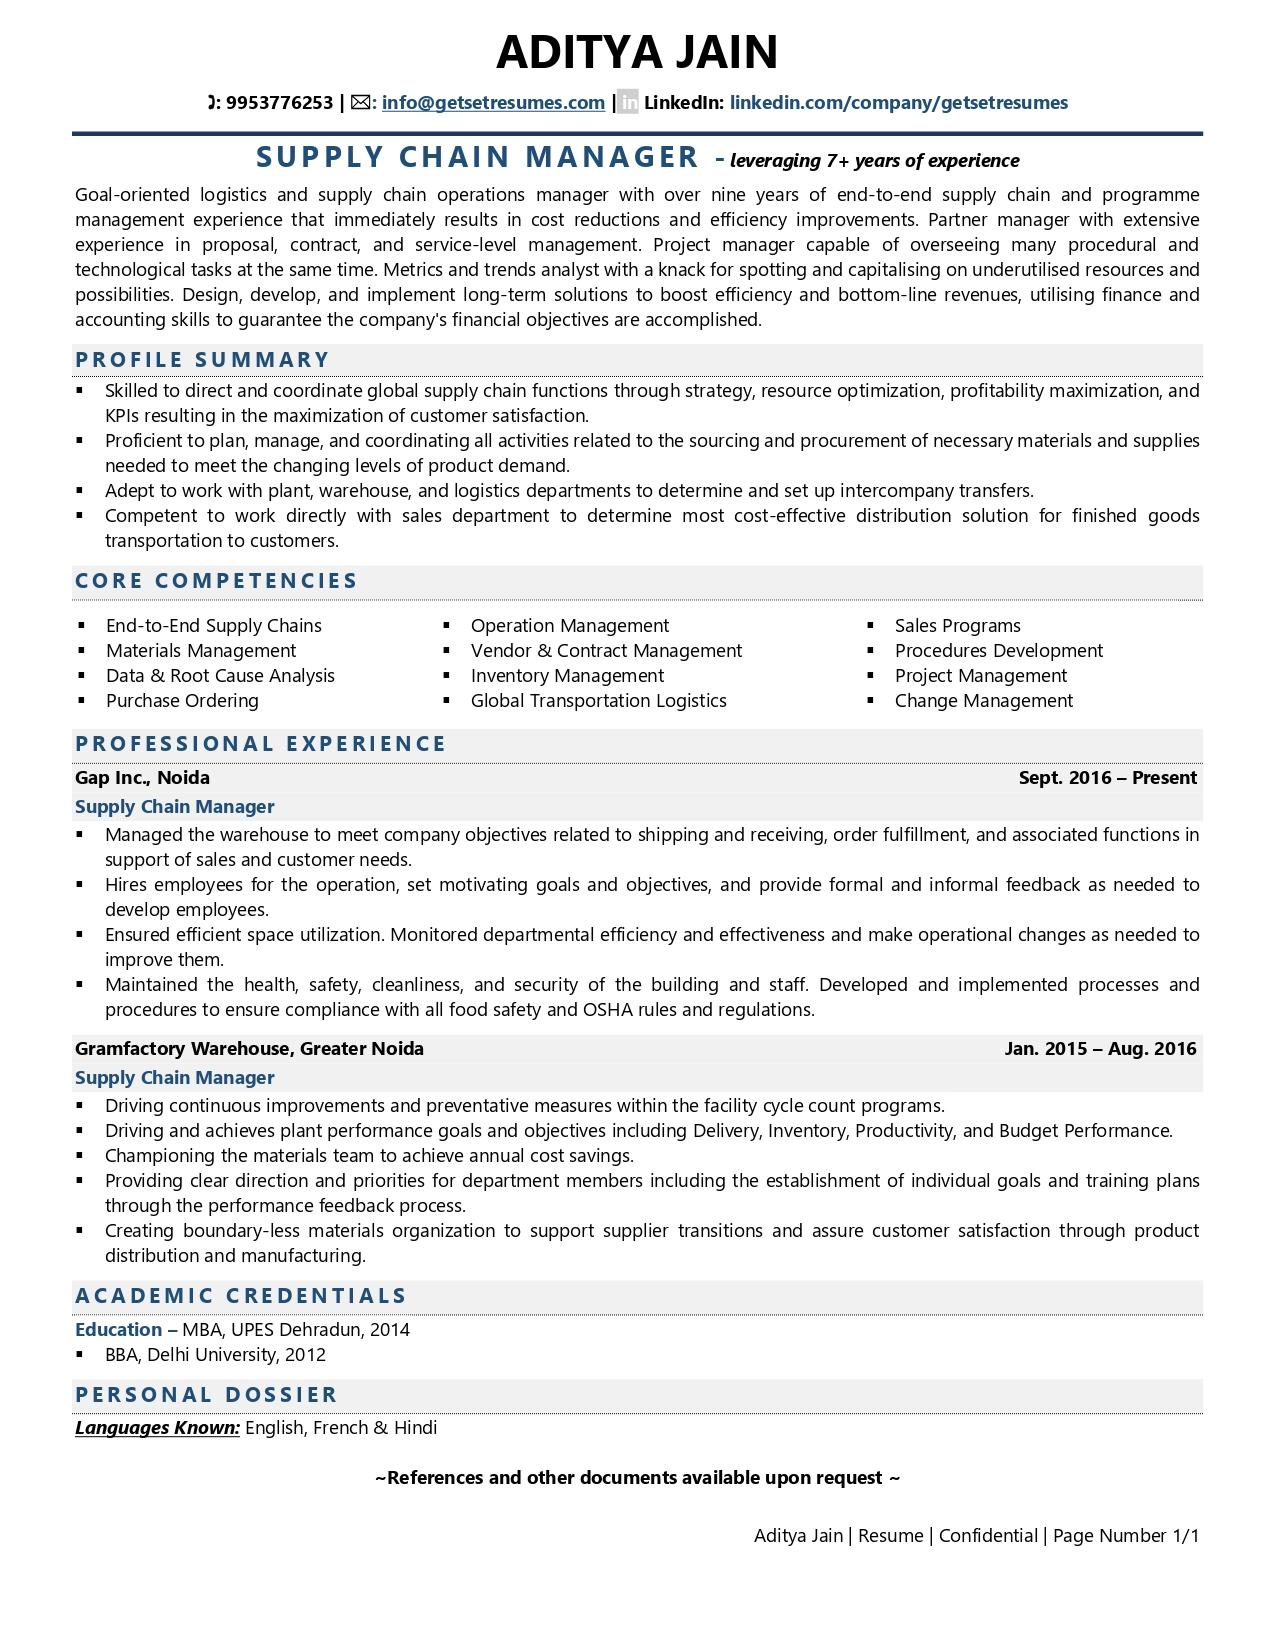 Supply Chain Manager Resume Examples & Template (with job winning tips)